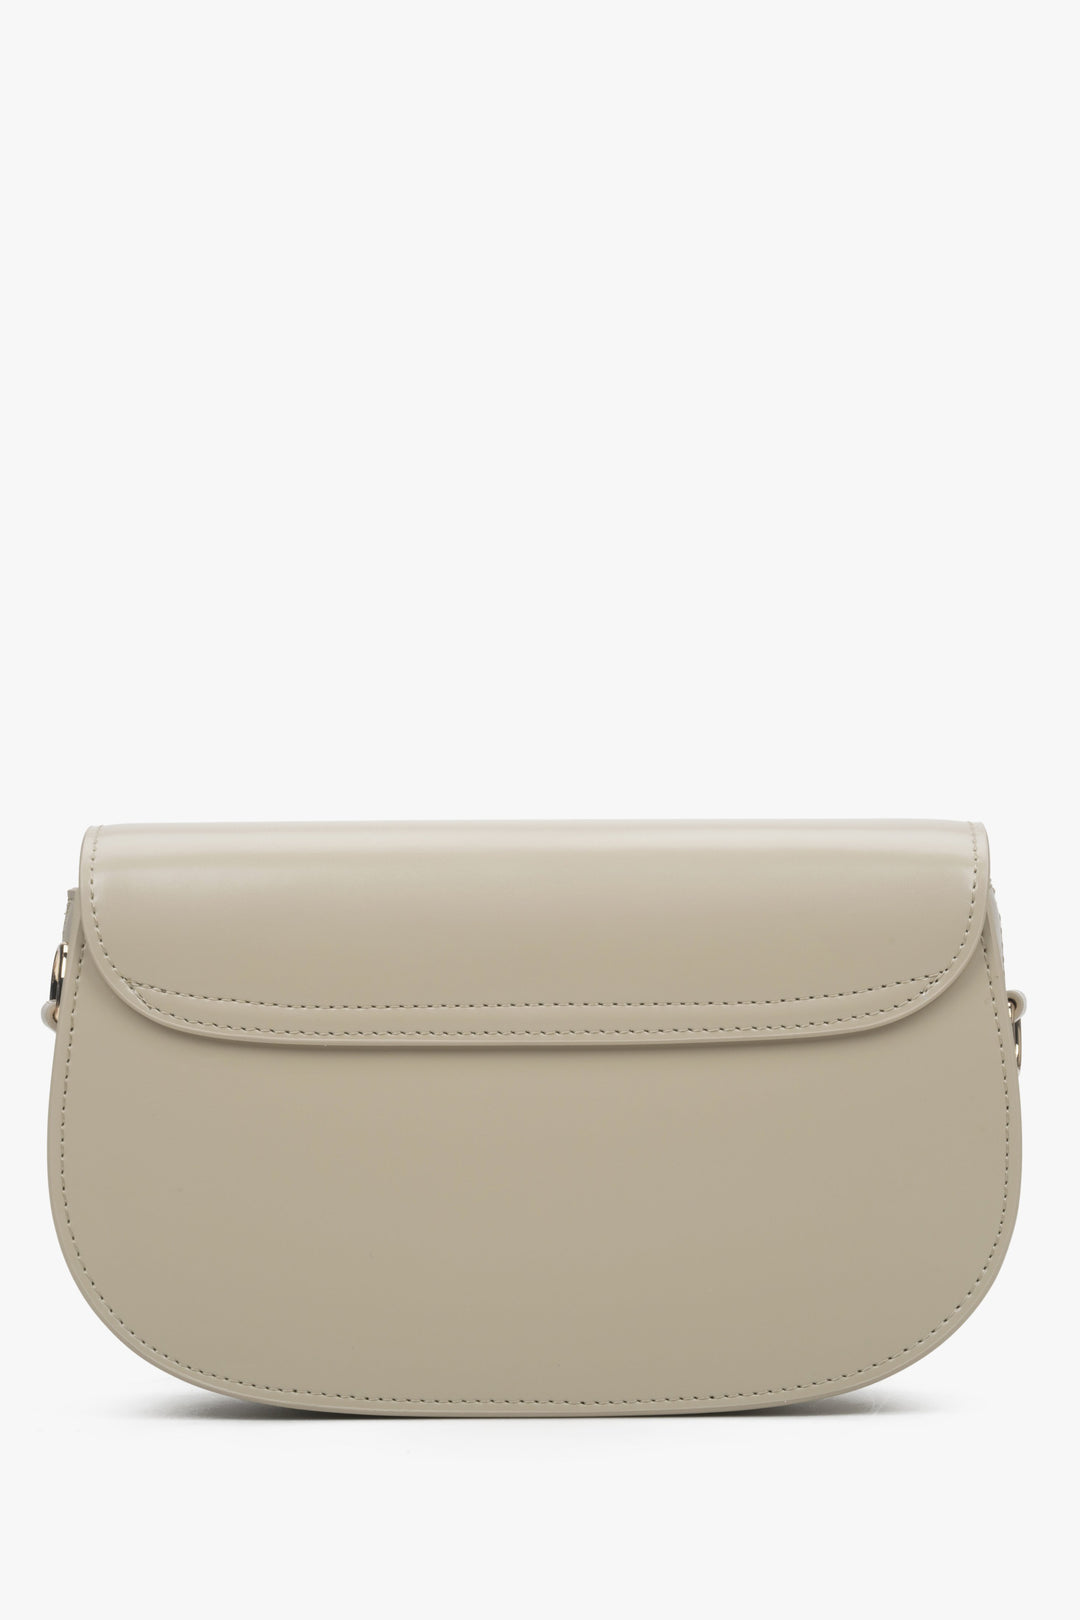 Estro women's leather bag with adjustable strap, grey and beige colour - back side.